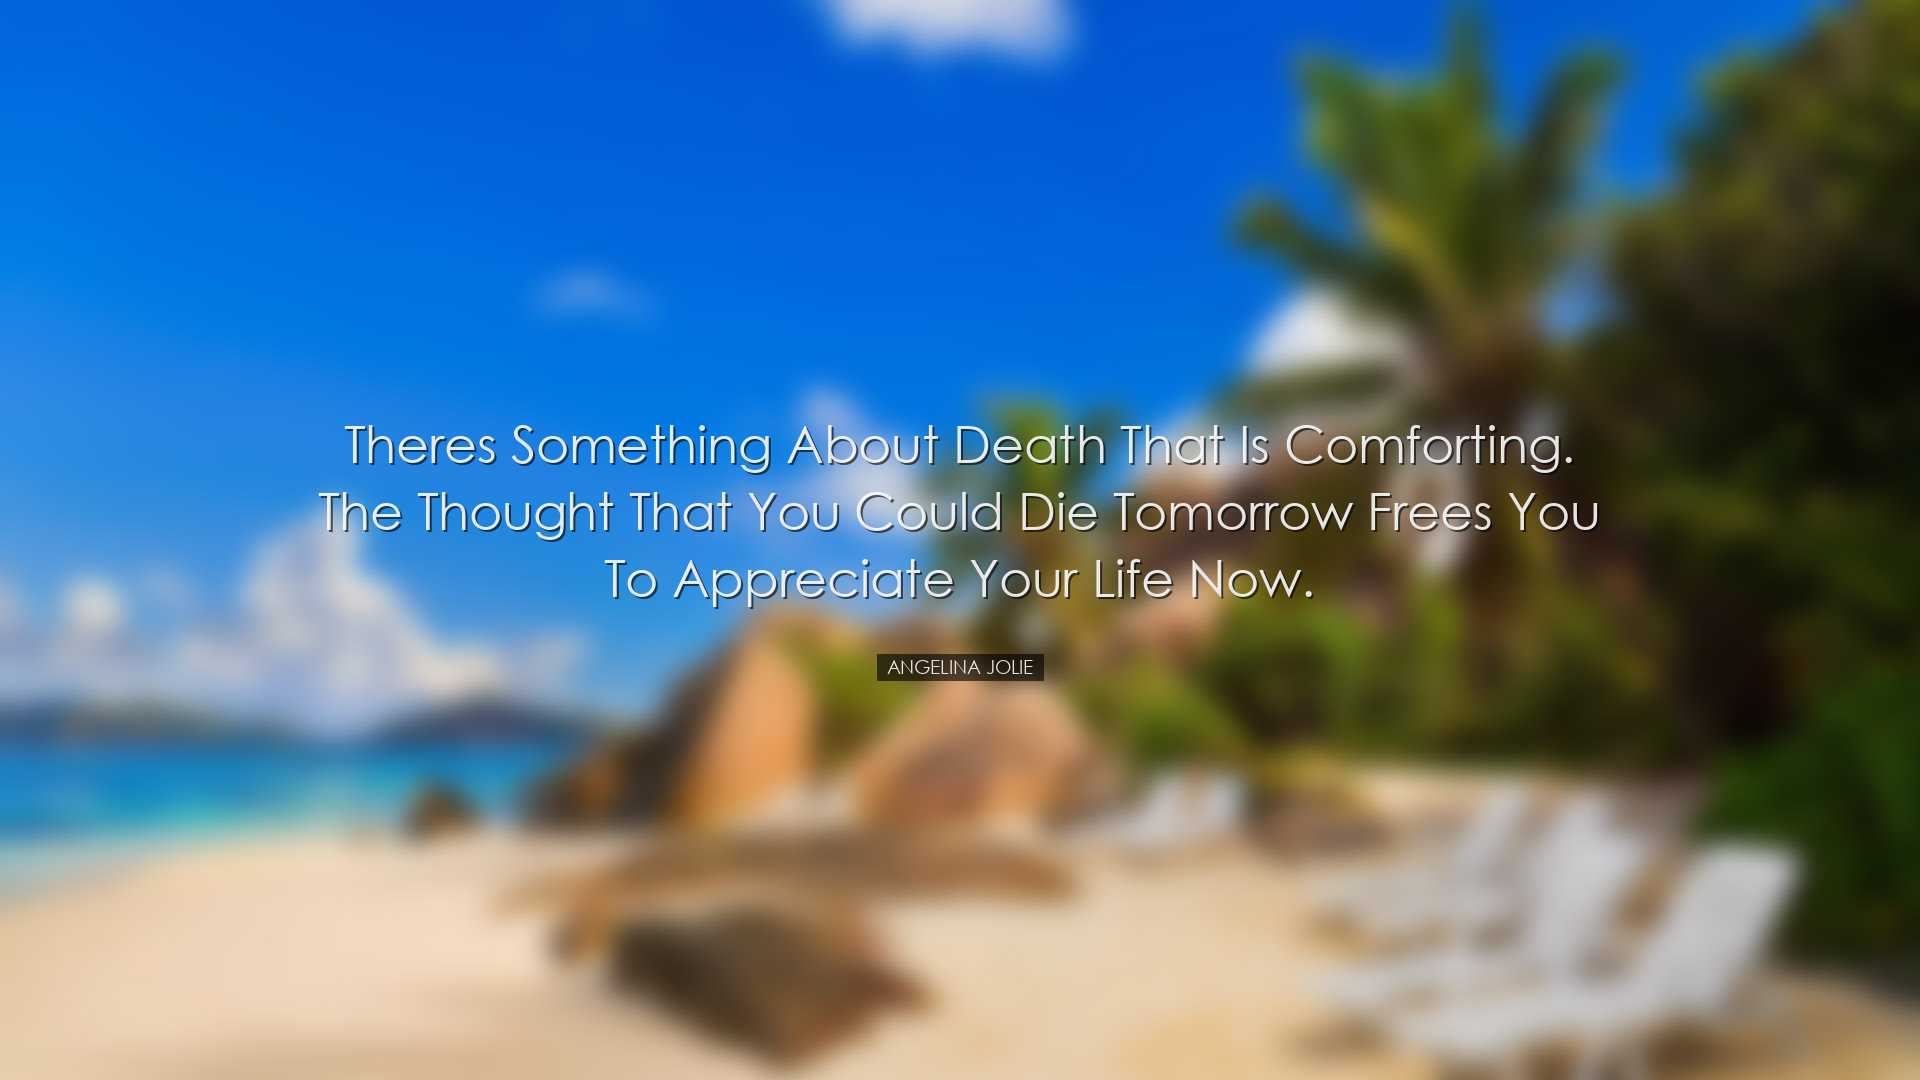 Theres something about death that is comforting. The thought that